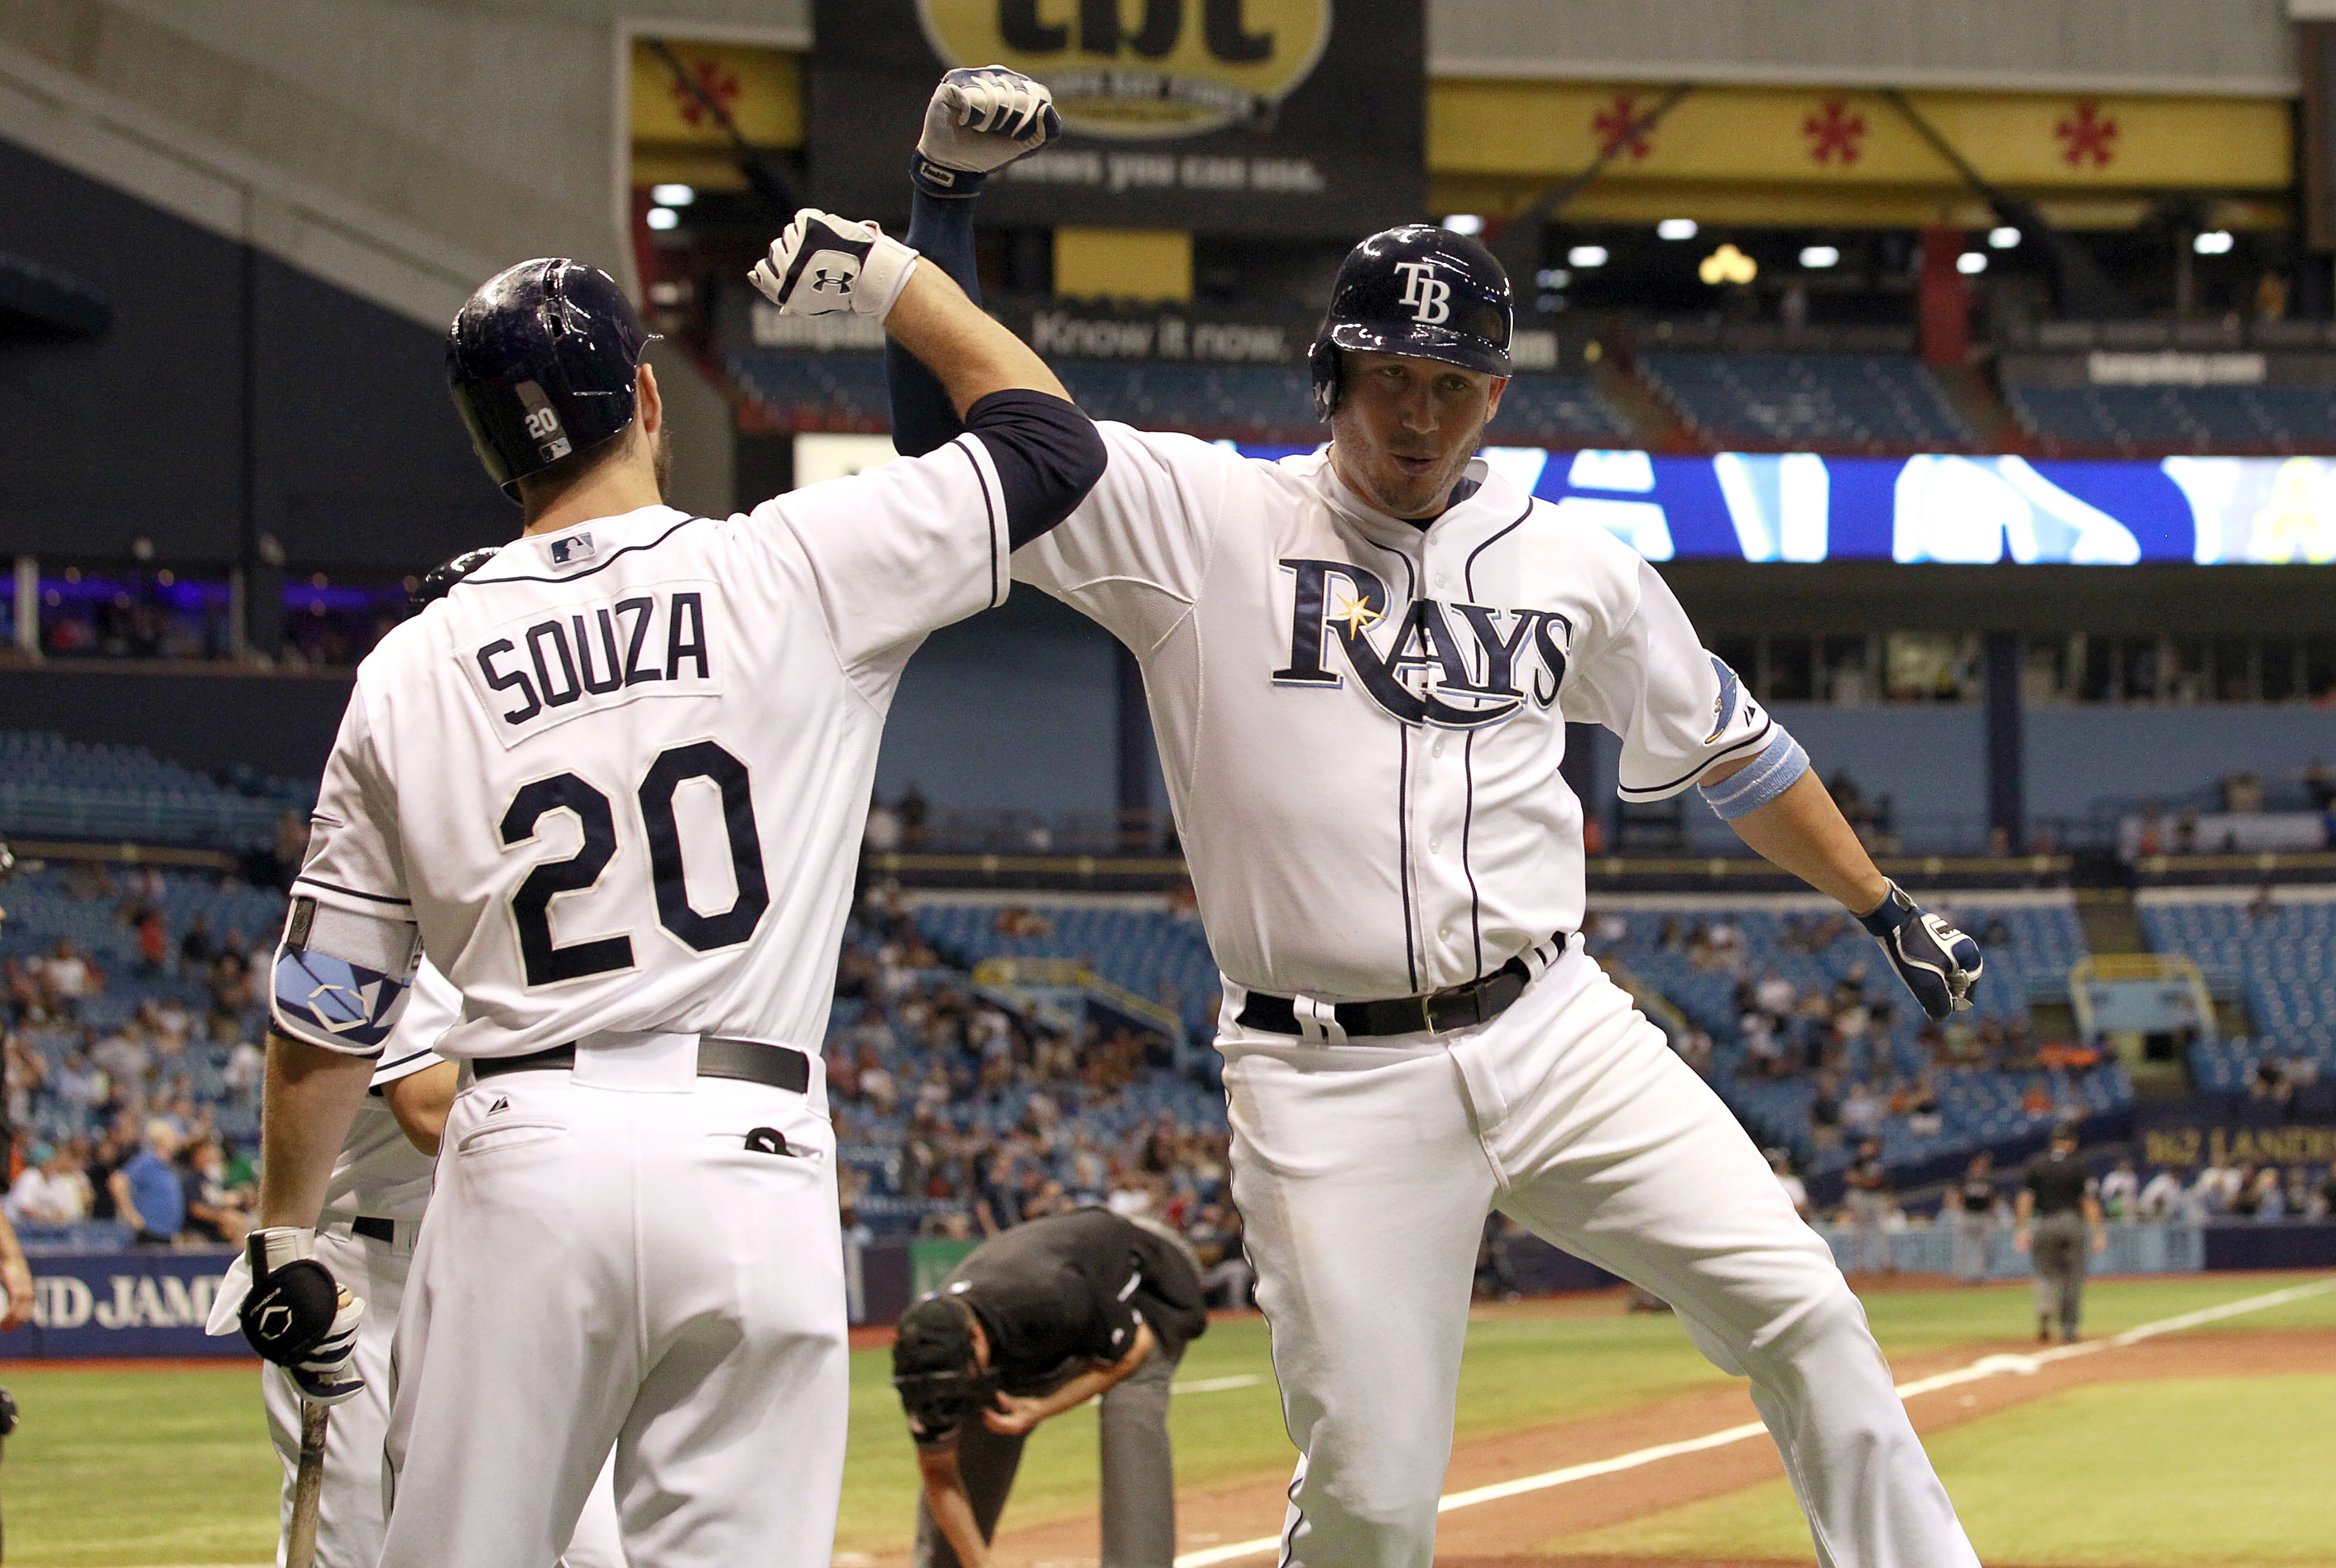 Steven Souza and the Rays had a surprising number of fantasy relevant players, will they do it again?